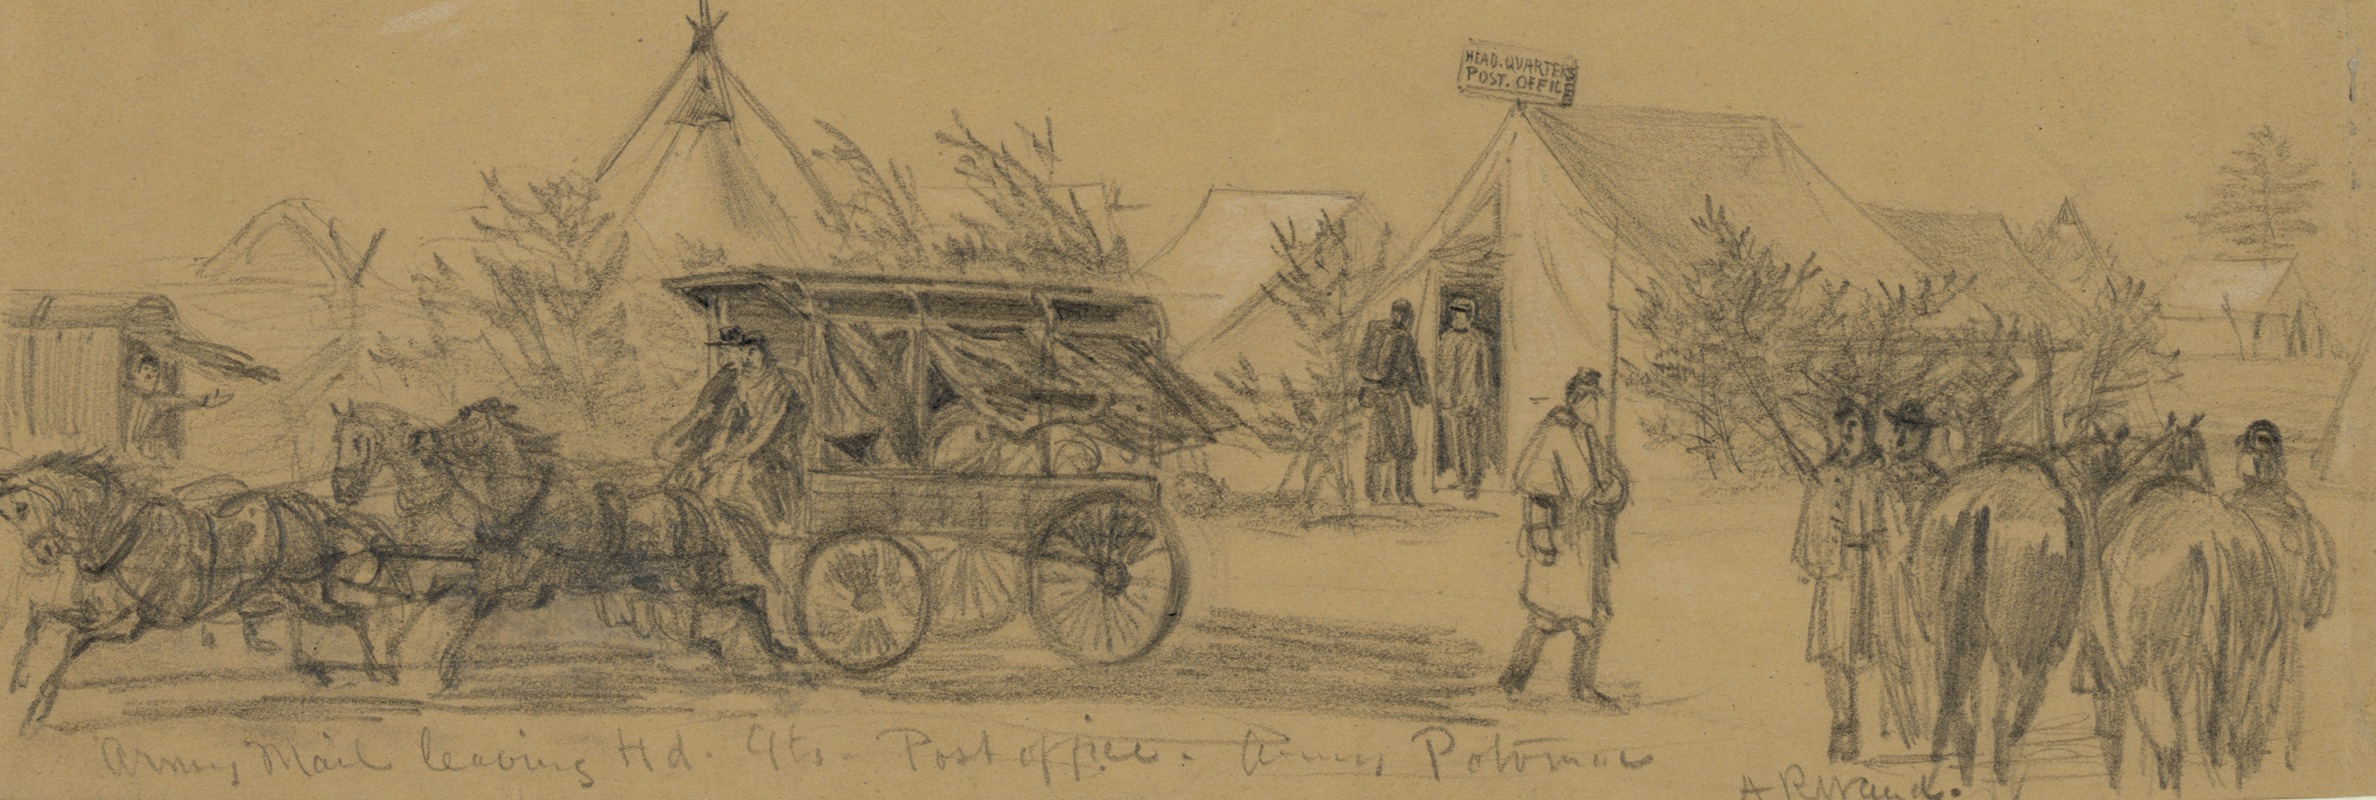 Alfred Rudolph Waud - Army Mail leaving Hd.Qts. Post Office. Army Potomac